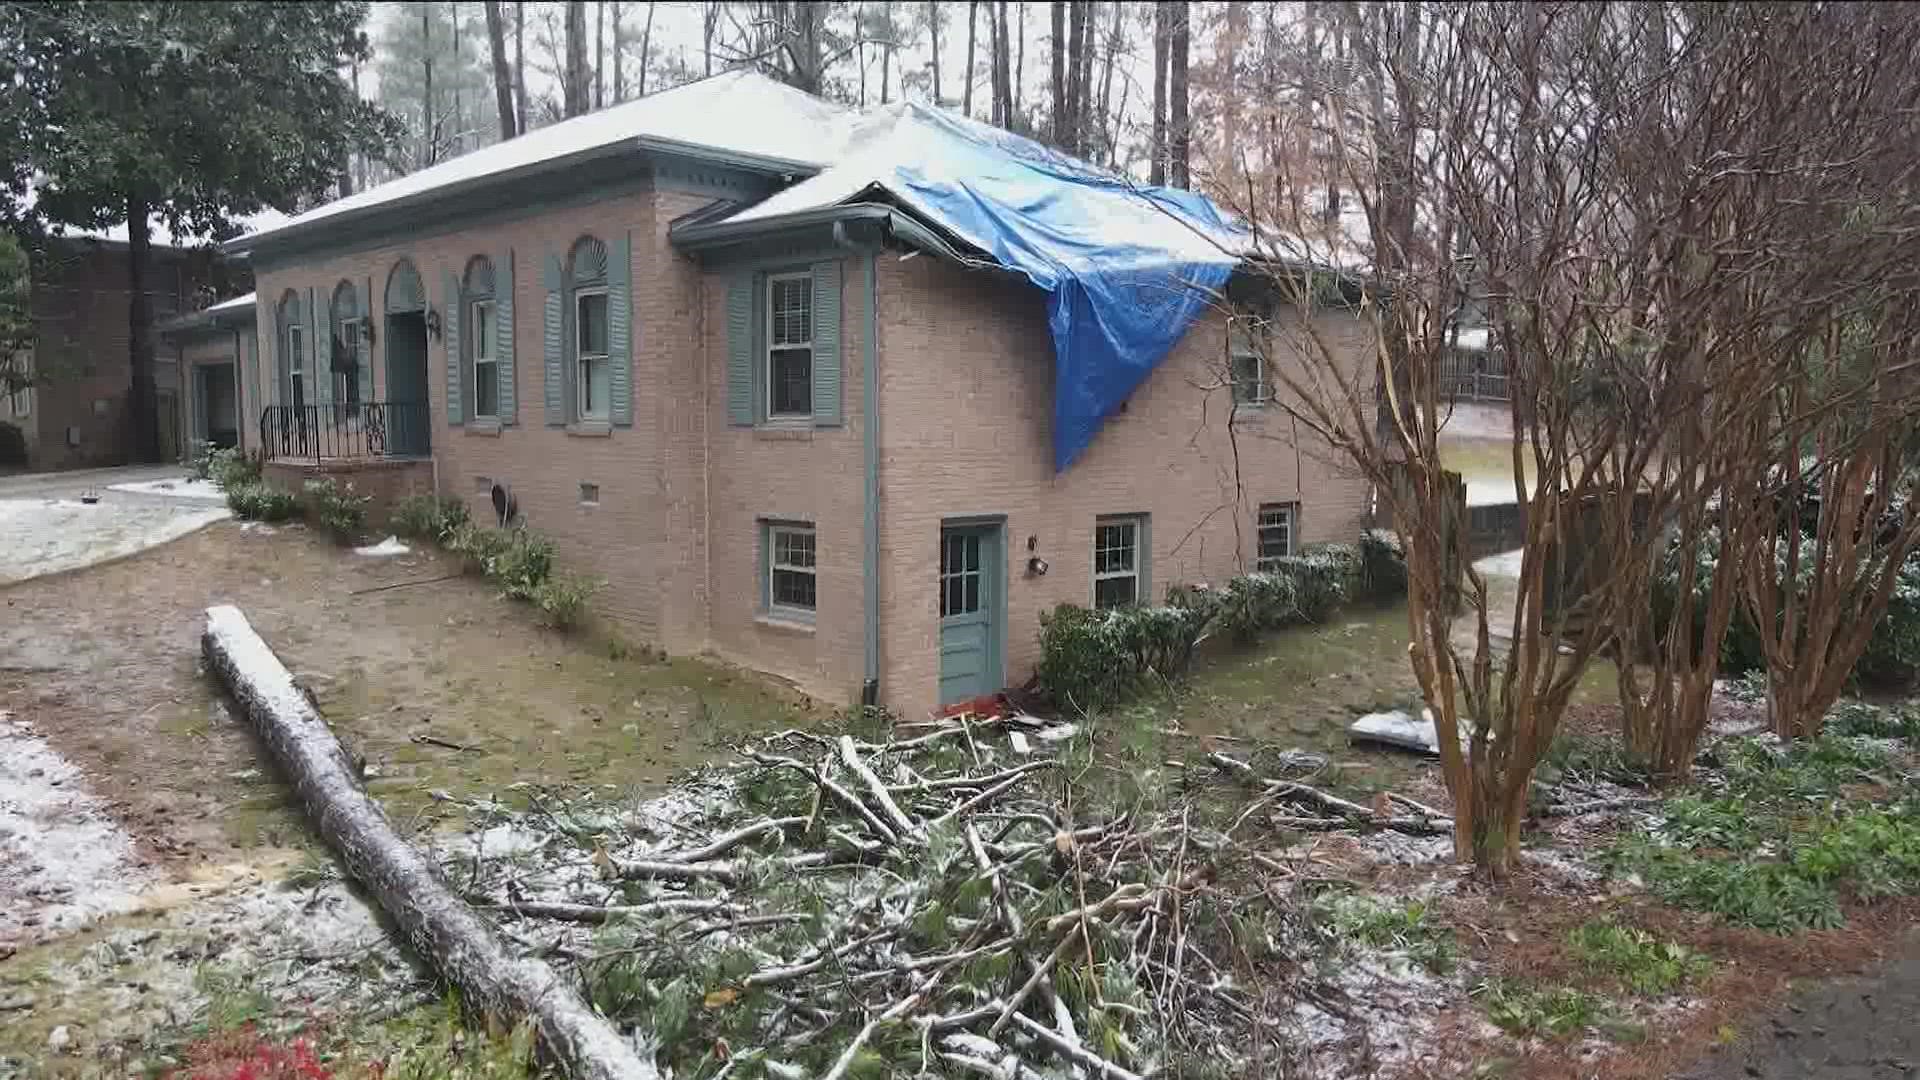 The tree toppled right on top of the homeowner's bedroom.